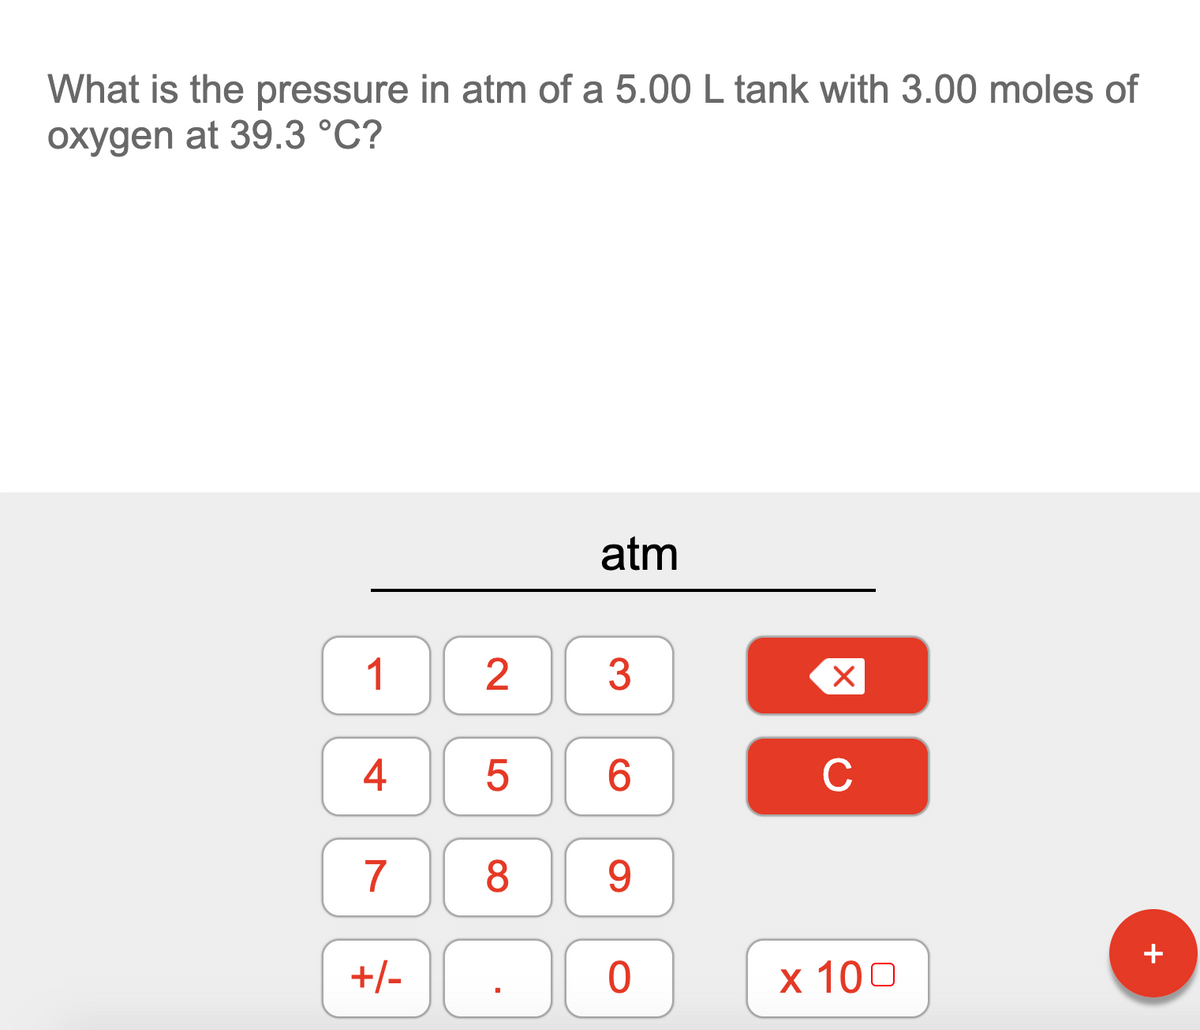 What is the pressure in atm of a 5.00 L tank with 3.00 moles of
oxygen at 39.3 °C?
atm
1
3
4
C
7
8.
9
+
+/-
х 100
2.
